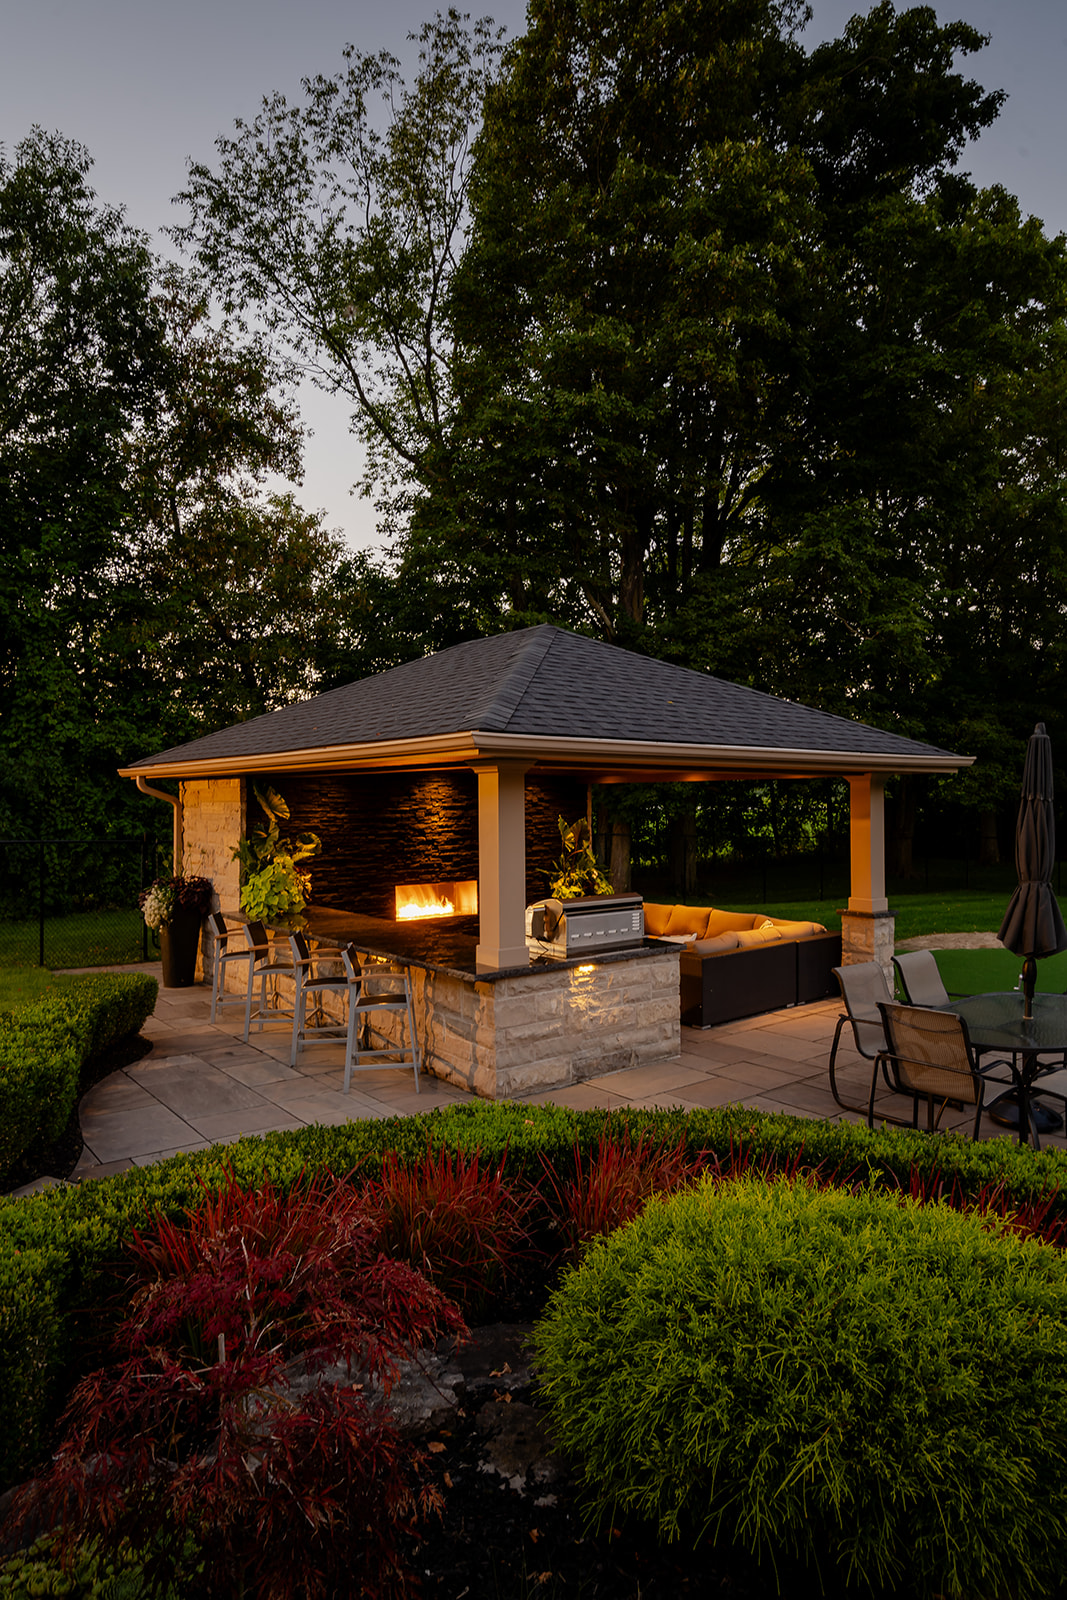 An outdoor patio set with lights on underneath the gazebo.